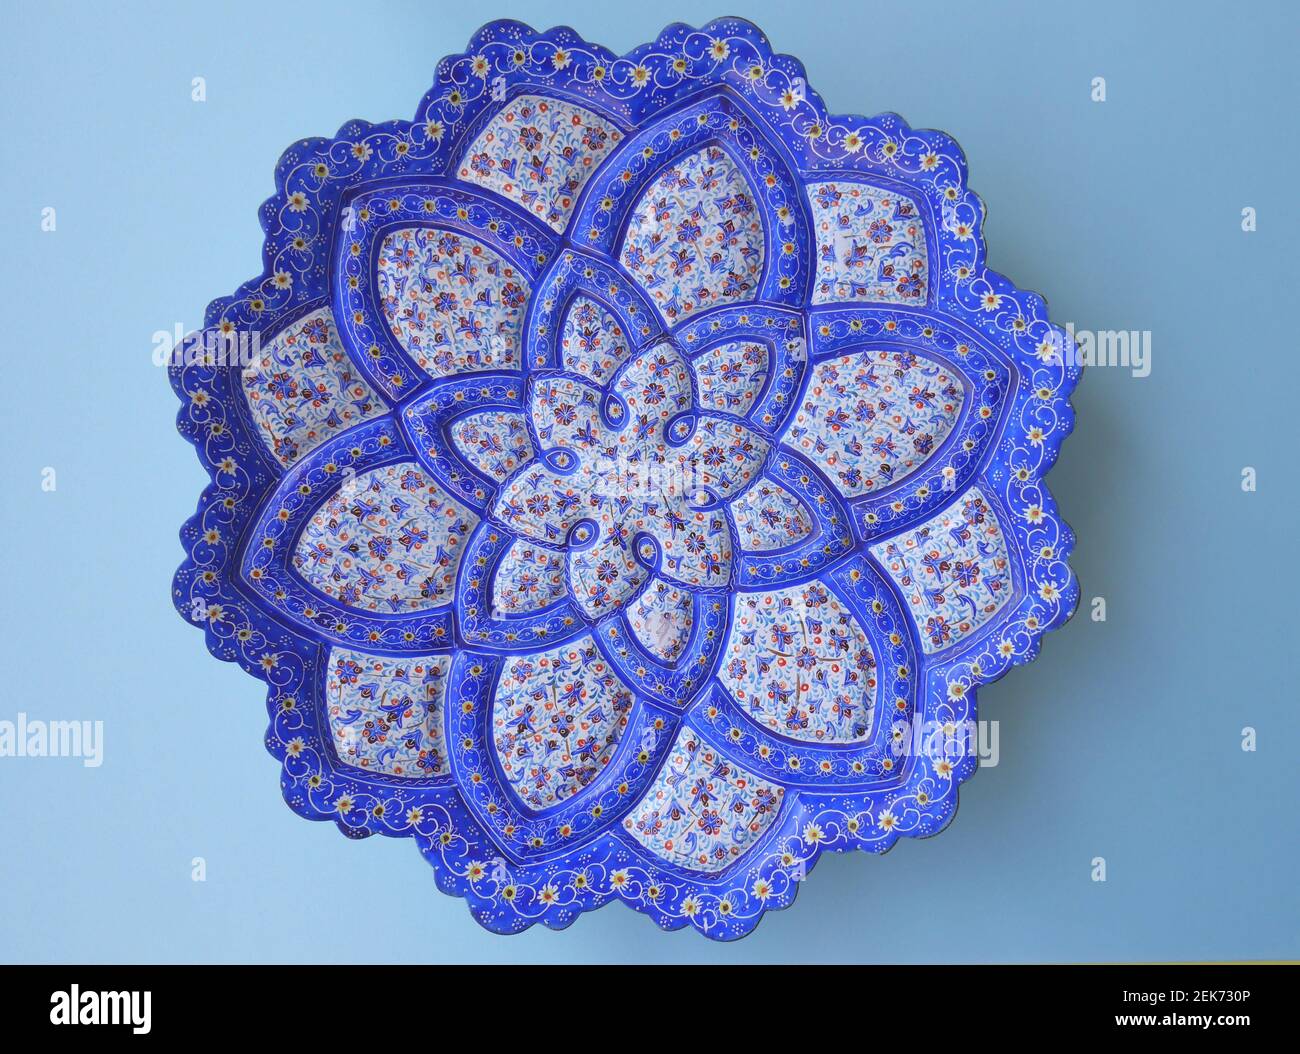 Blue, turquoise enameled metal plate from Iran, Persia Stock Photo